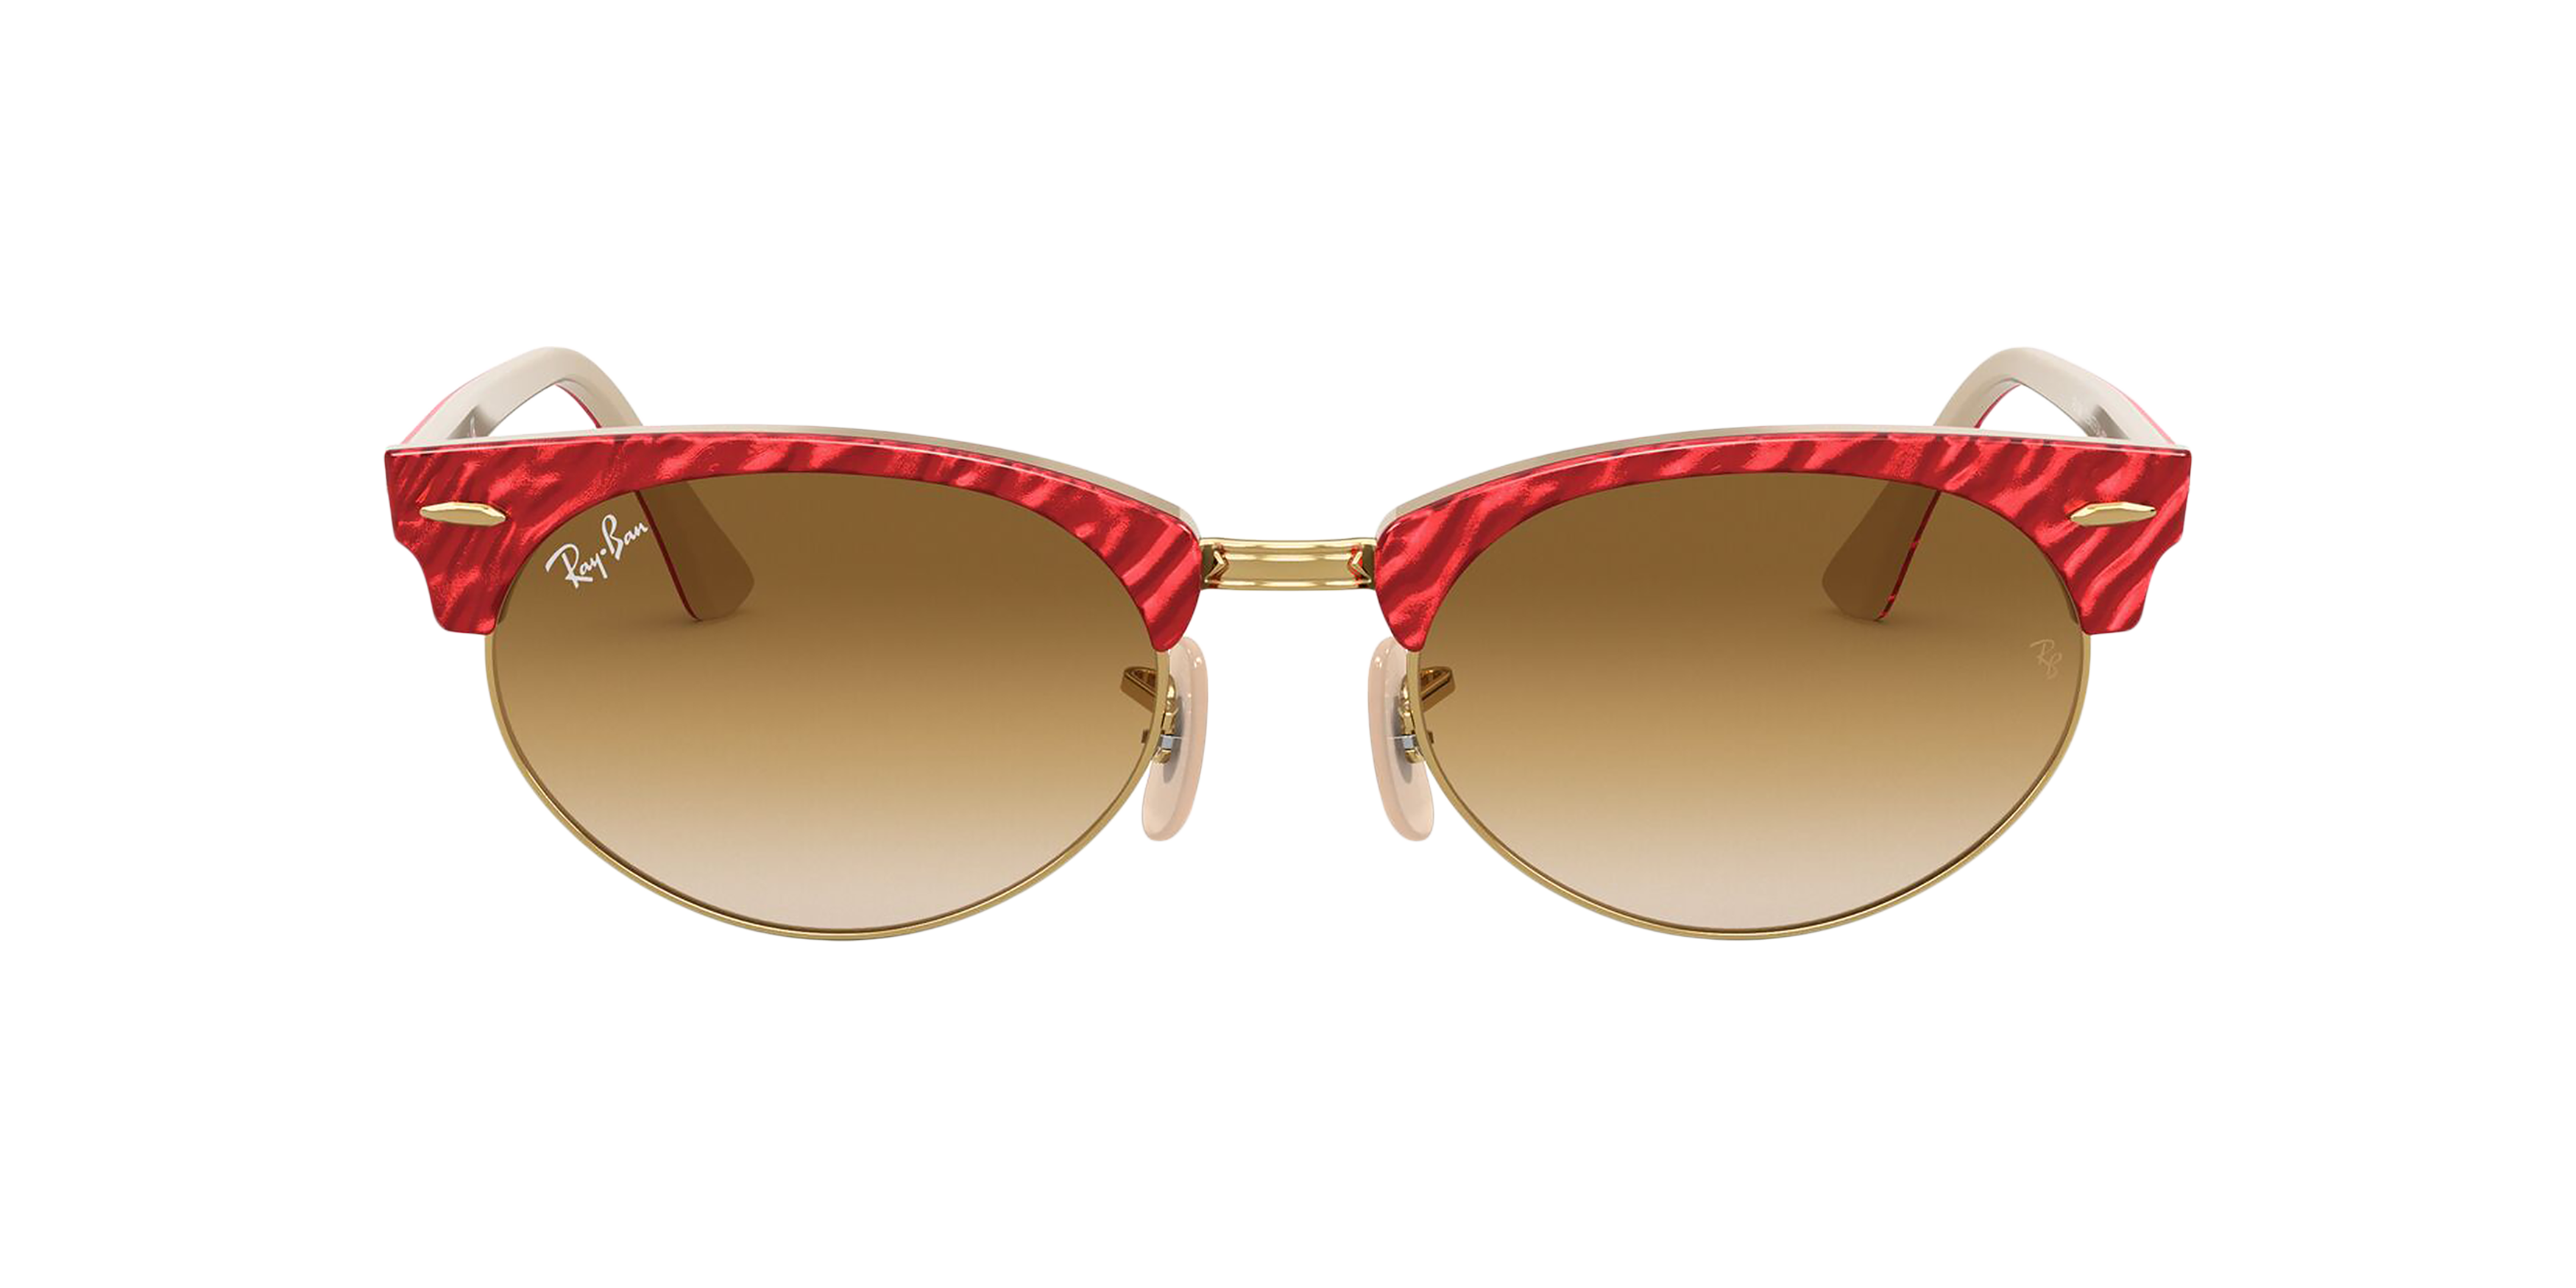 [products.image.front] Ray-Ban Clubmaster Oval RB3946 130851